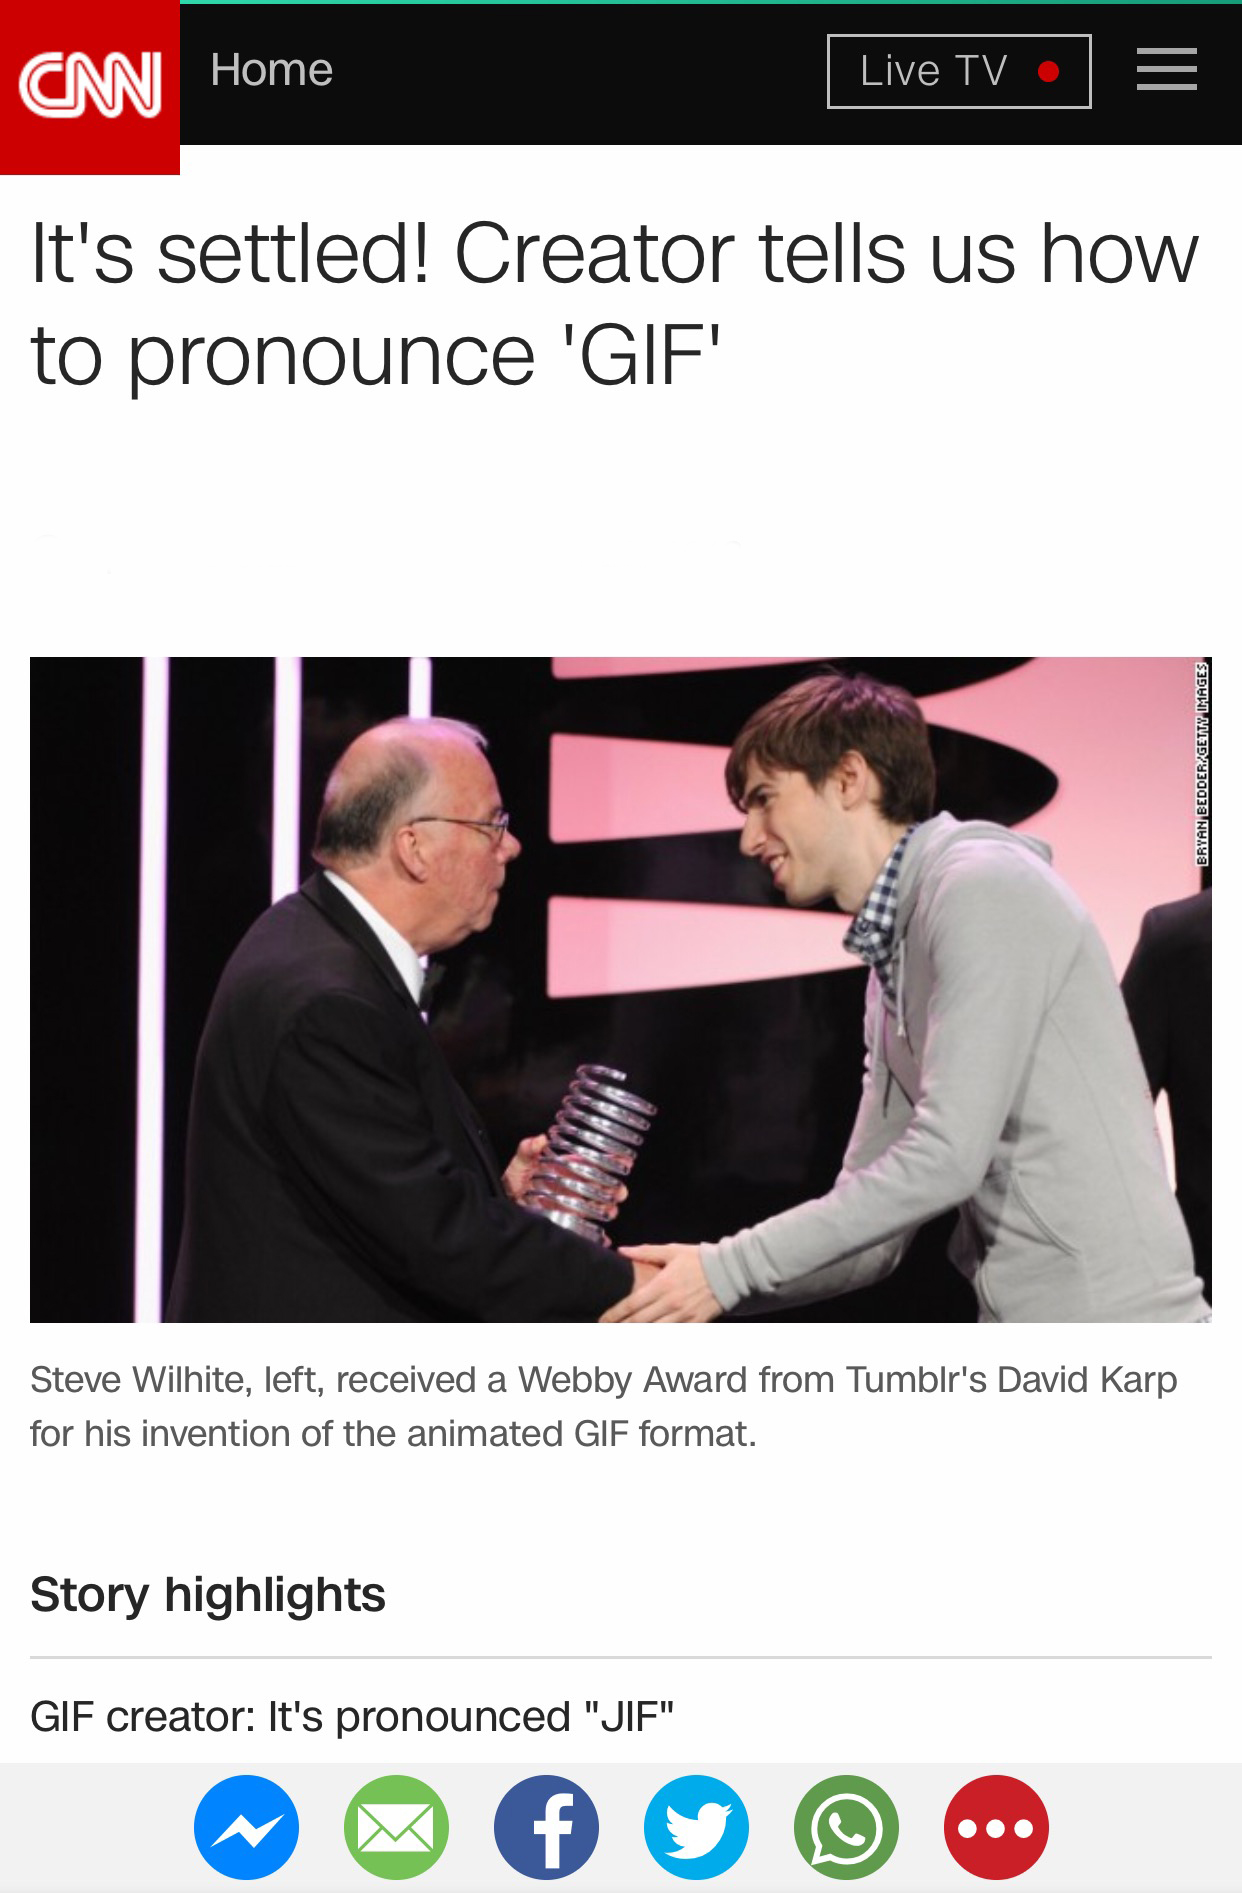 conversation - Cnn Home Live Tv It's settled! Creator tells us how to pronounce 'Gif' Steve Wilhite, left, received a Webby Award from Tumblr's David Karp for his invention of the animated Gif format. Story highlights Gif creator It's pronounced "Jif"